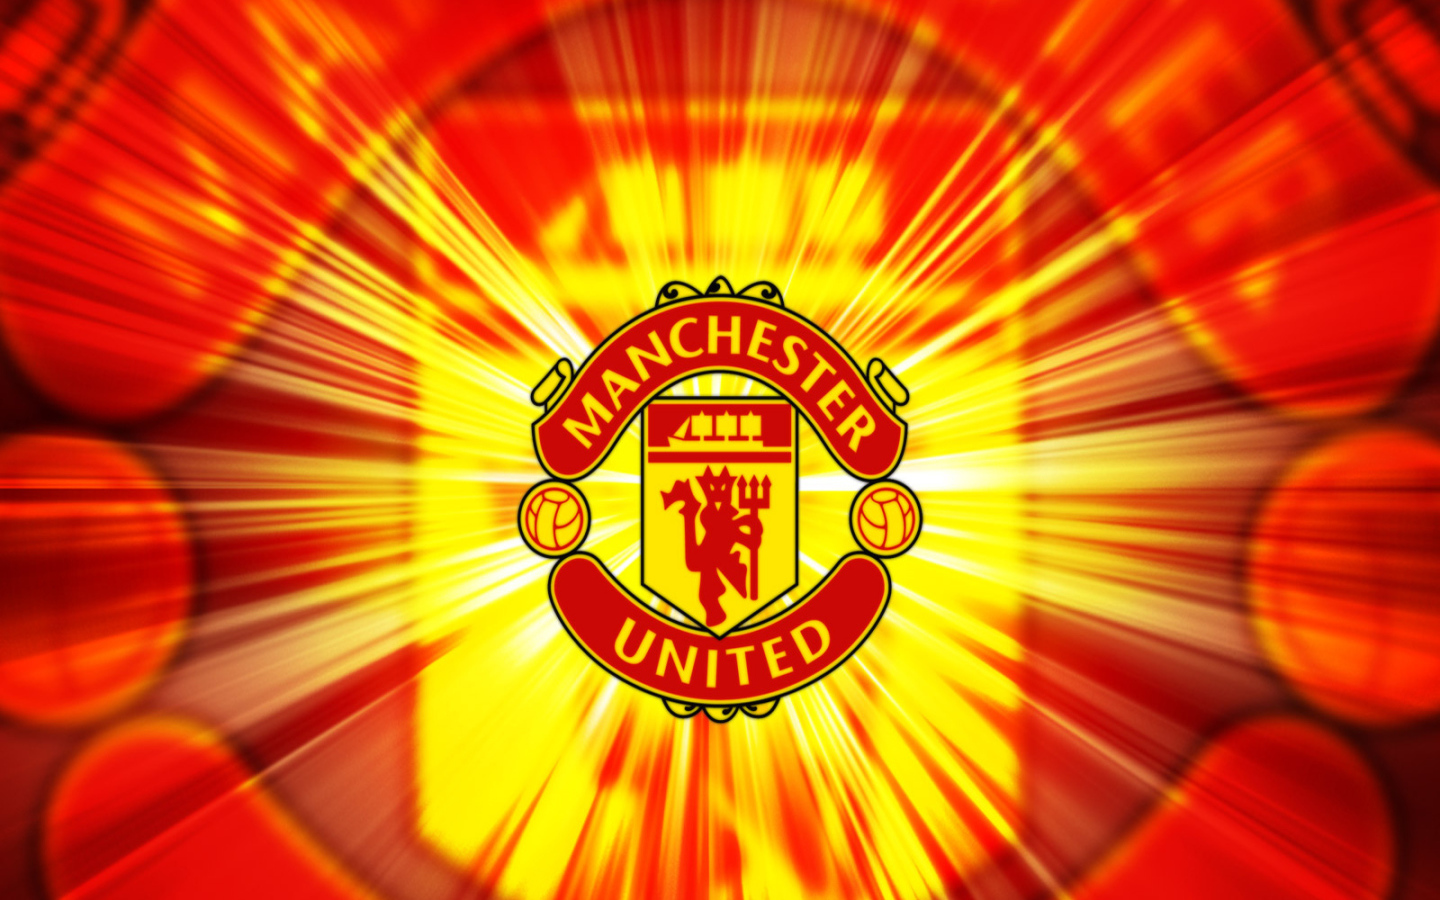  The famous football club of england Manchester United